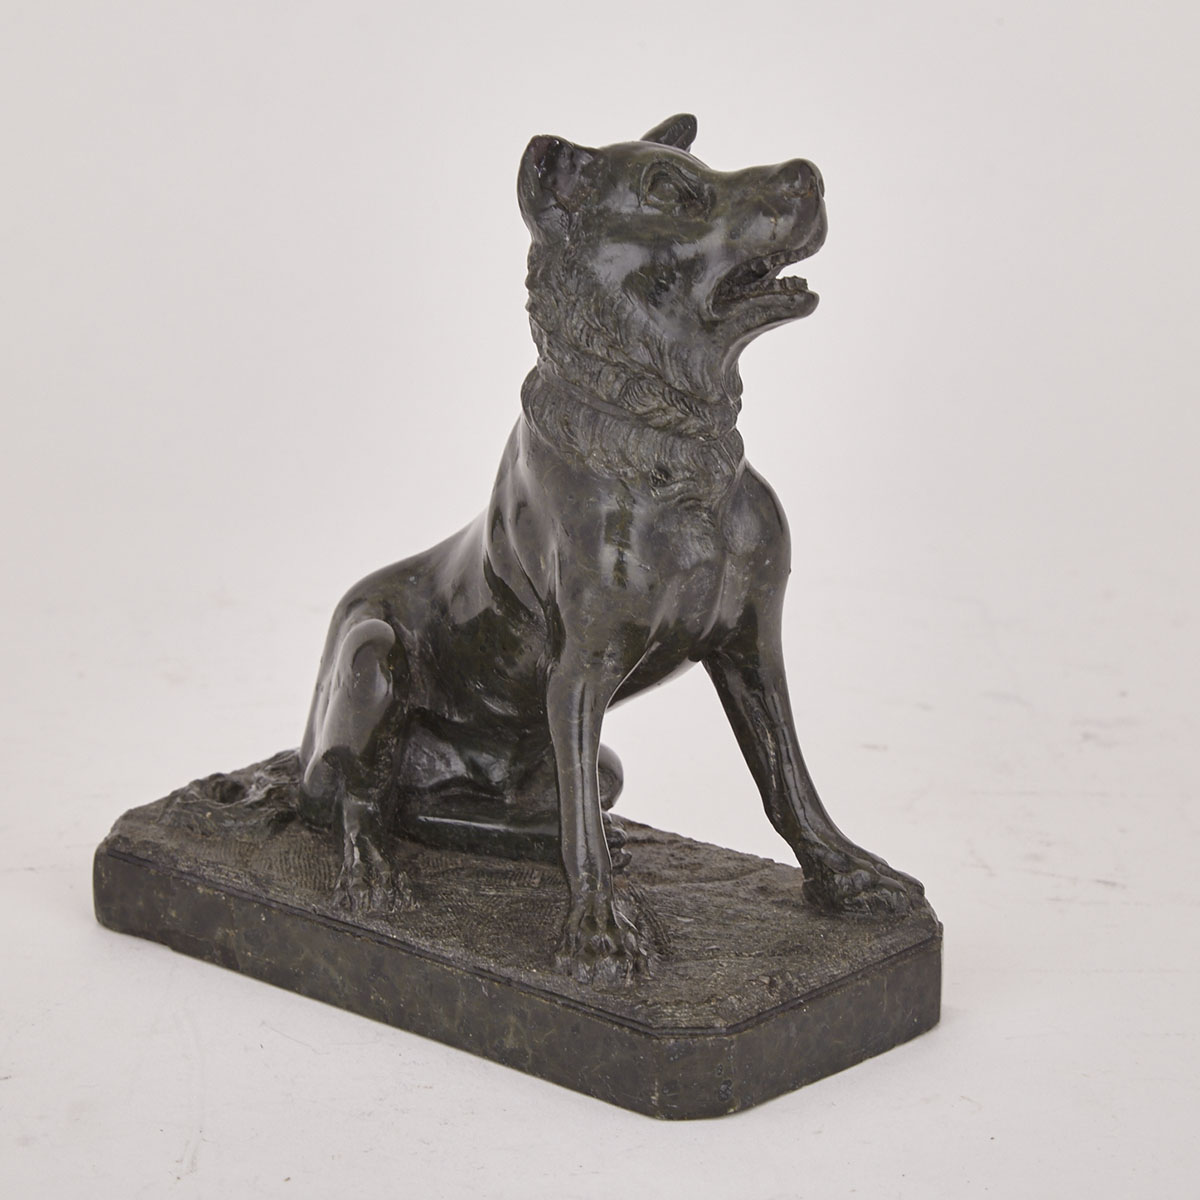 Italian Grand Tour Souvenir Carved Serpentine Marble Model of the Dog of Alcibiades, 19th century